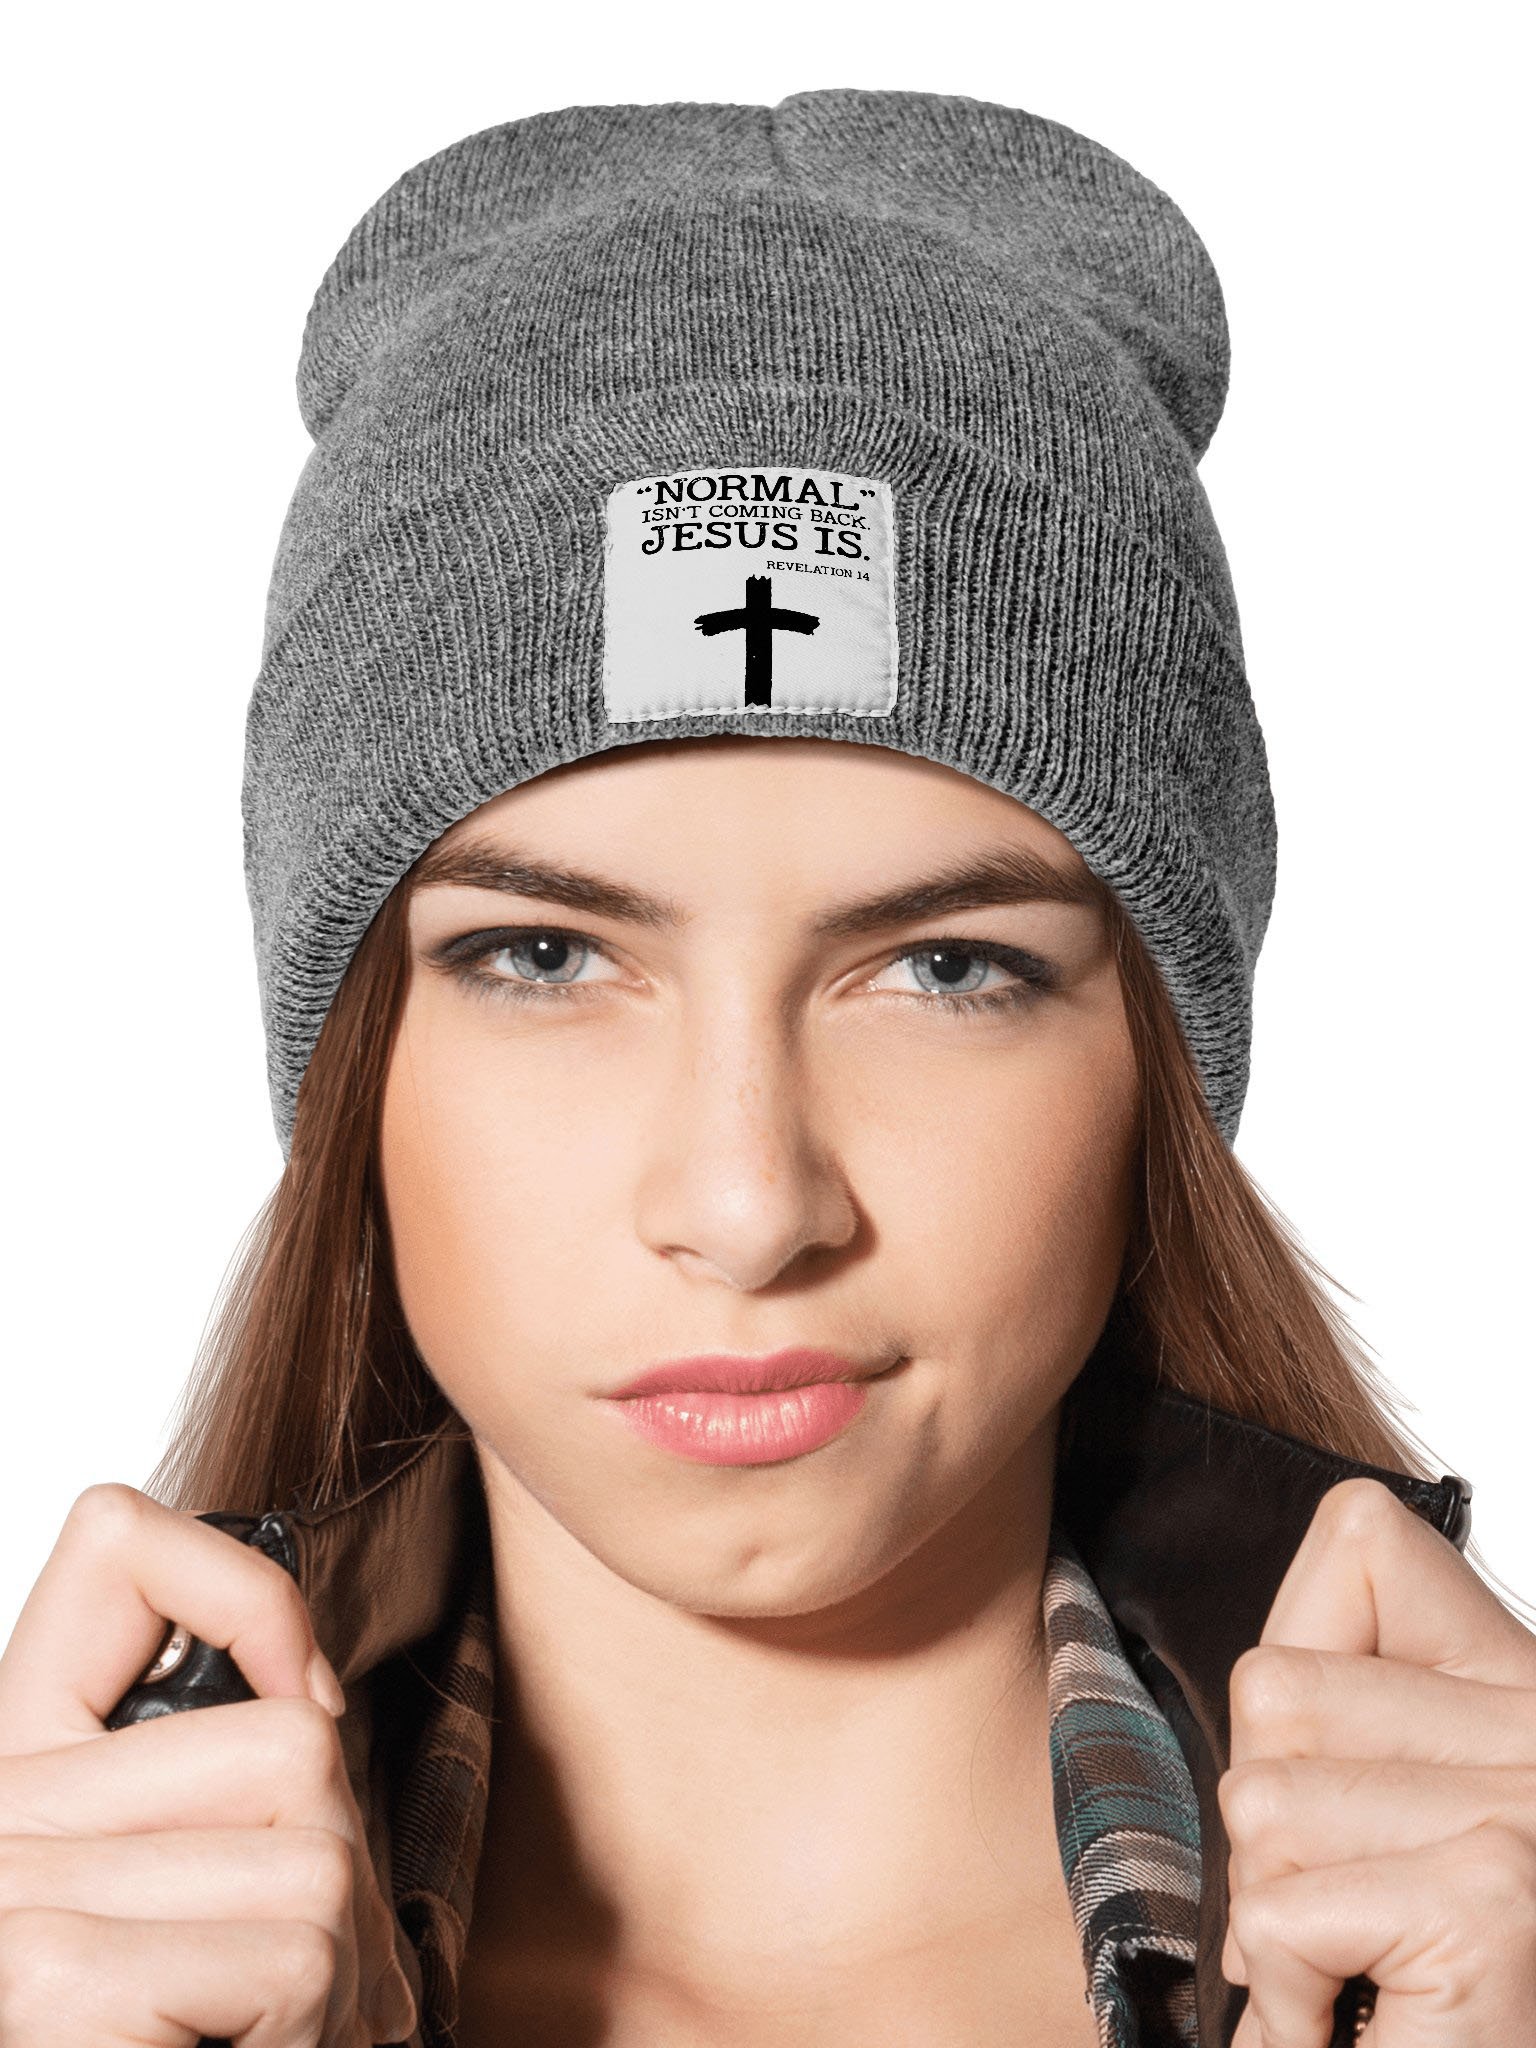 Normal Isn't Coming Back But Jesus Is Revelation 14 Beanie Hat